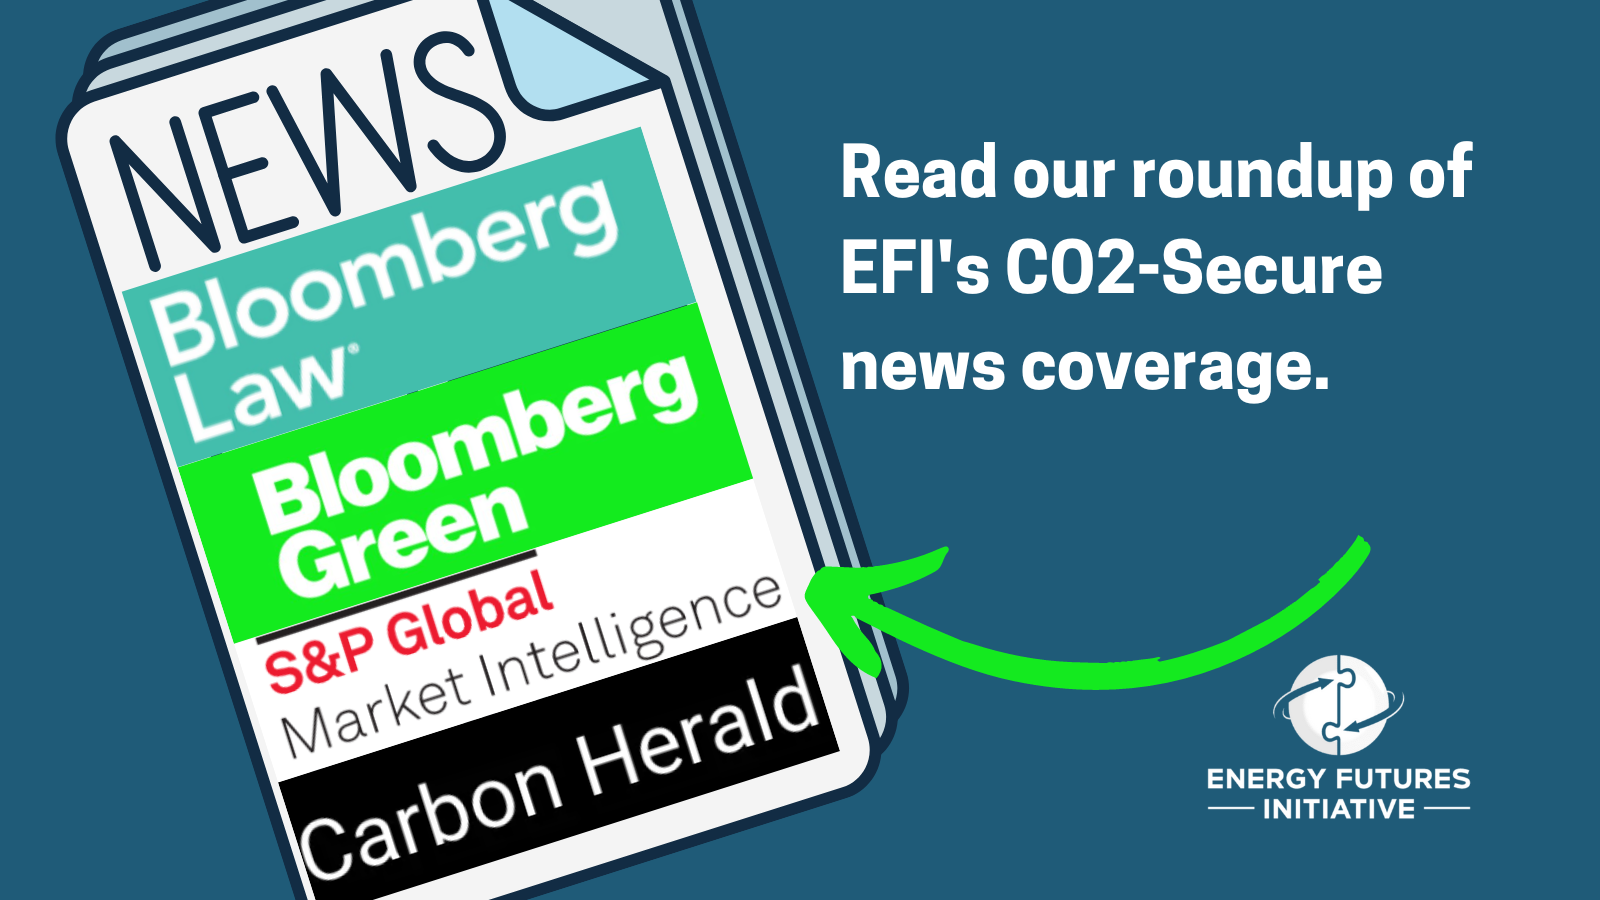 Read our roundup of EFI's CO2-Secure news coverage.